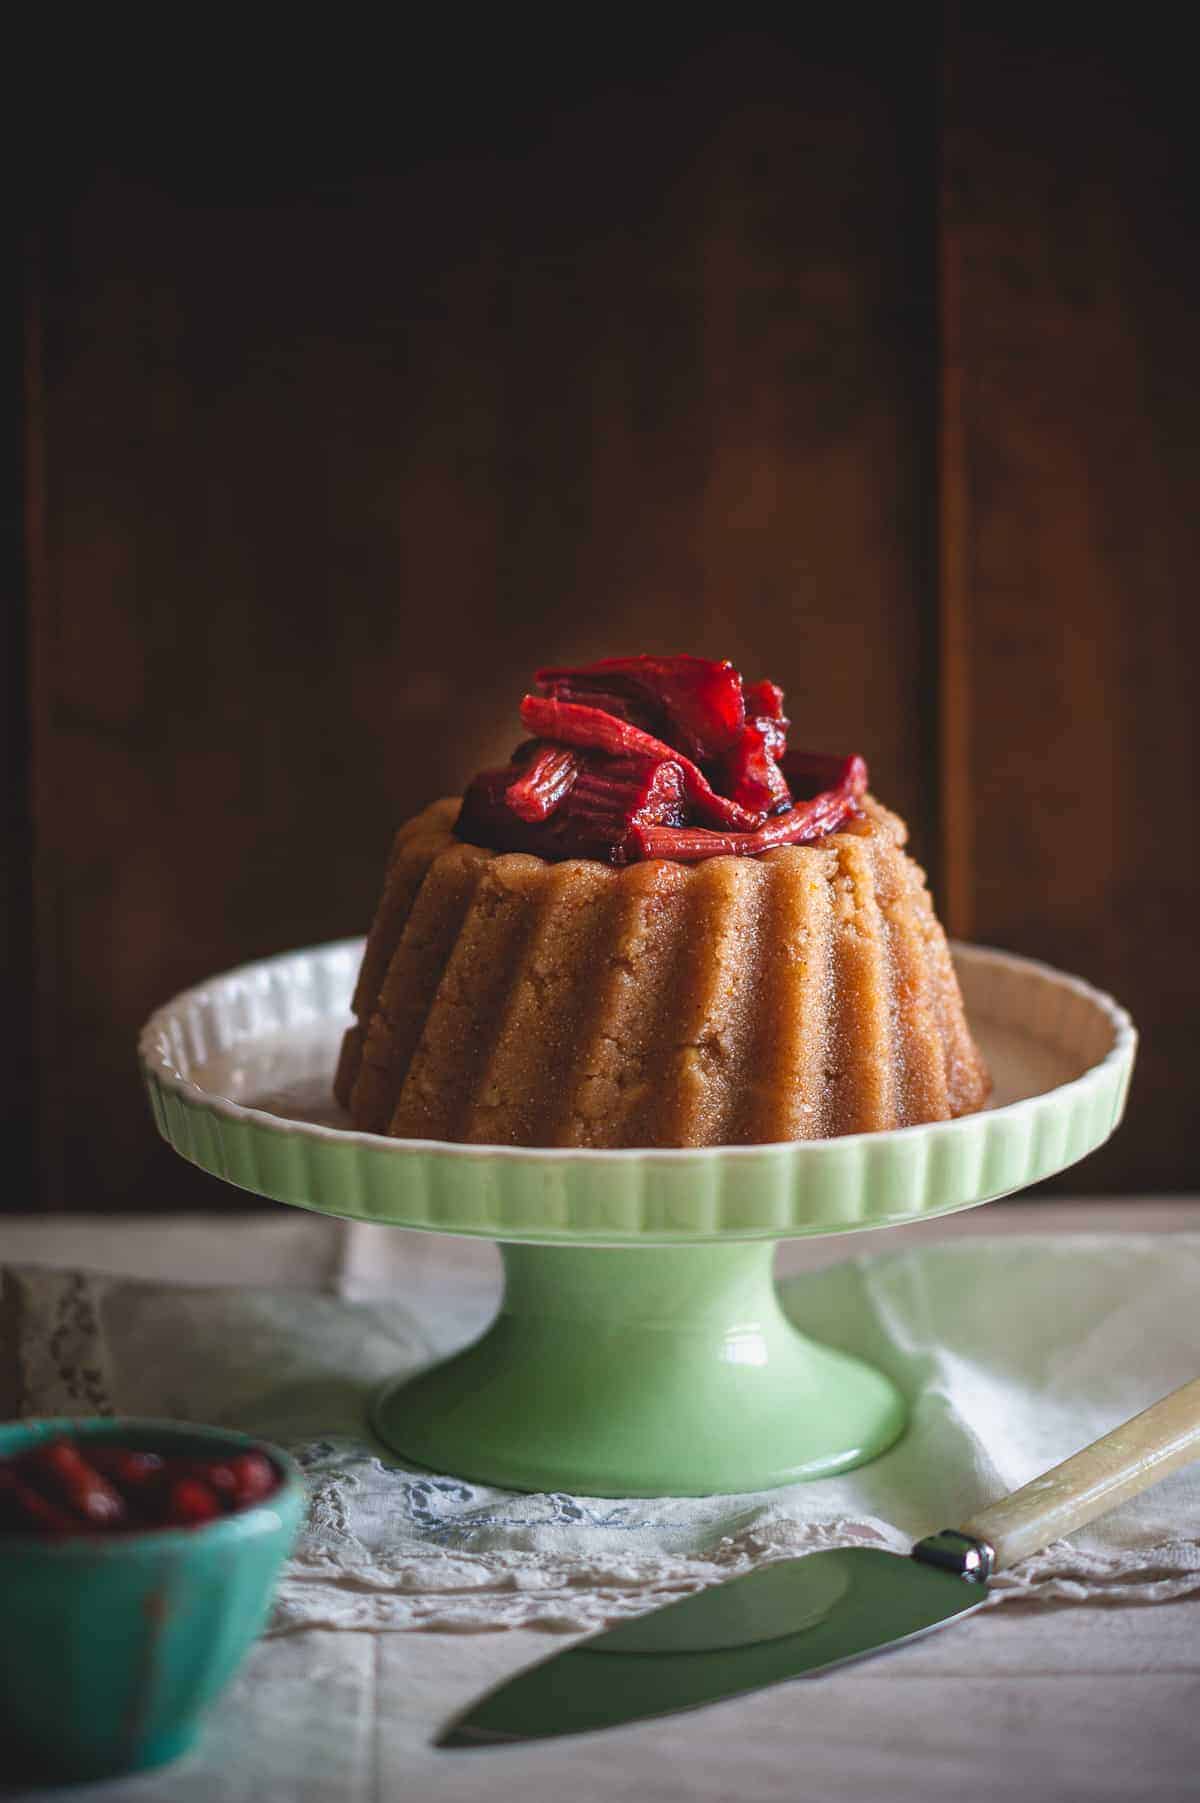 a Greek dessert known as halva on a cake stand served with a rhubarb compote